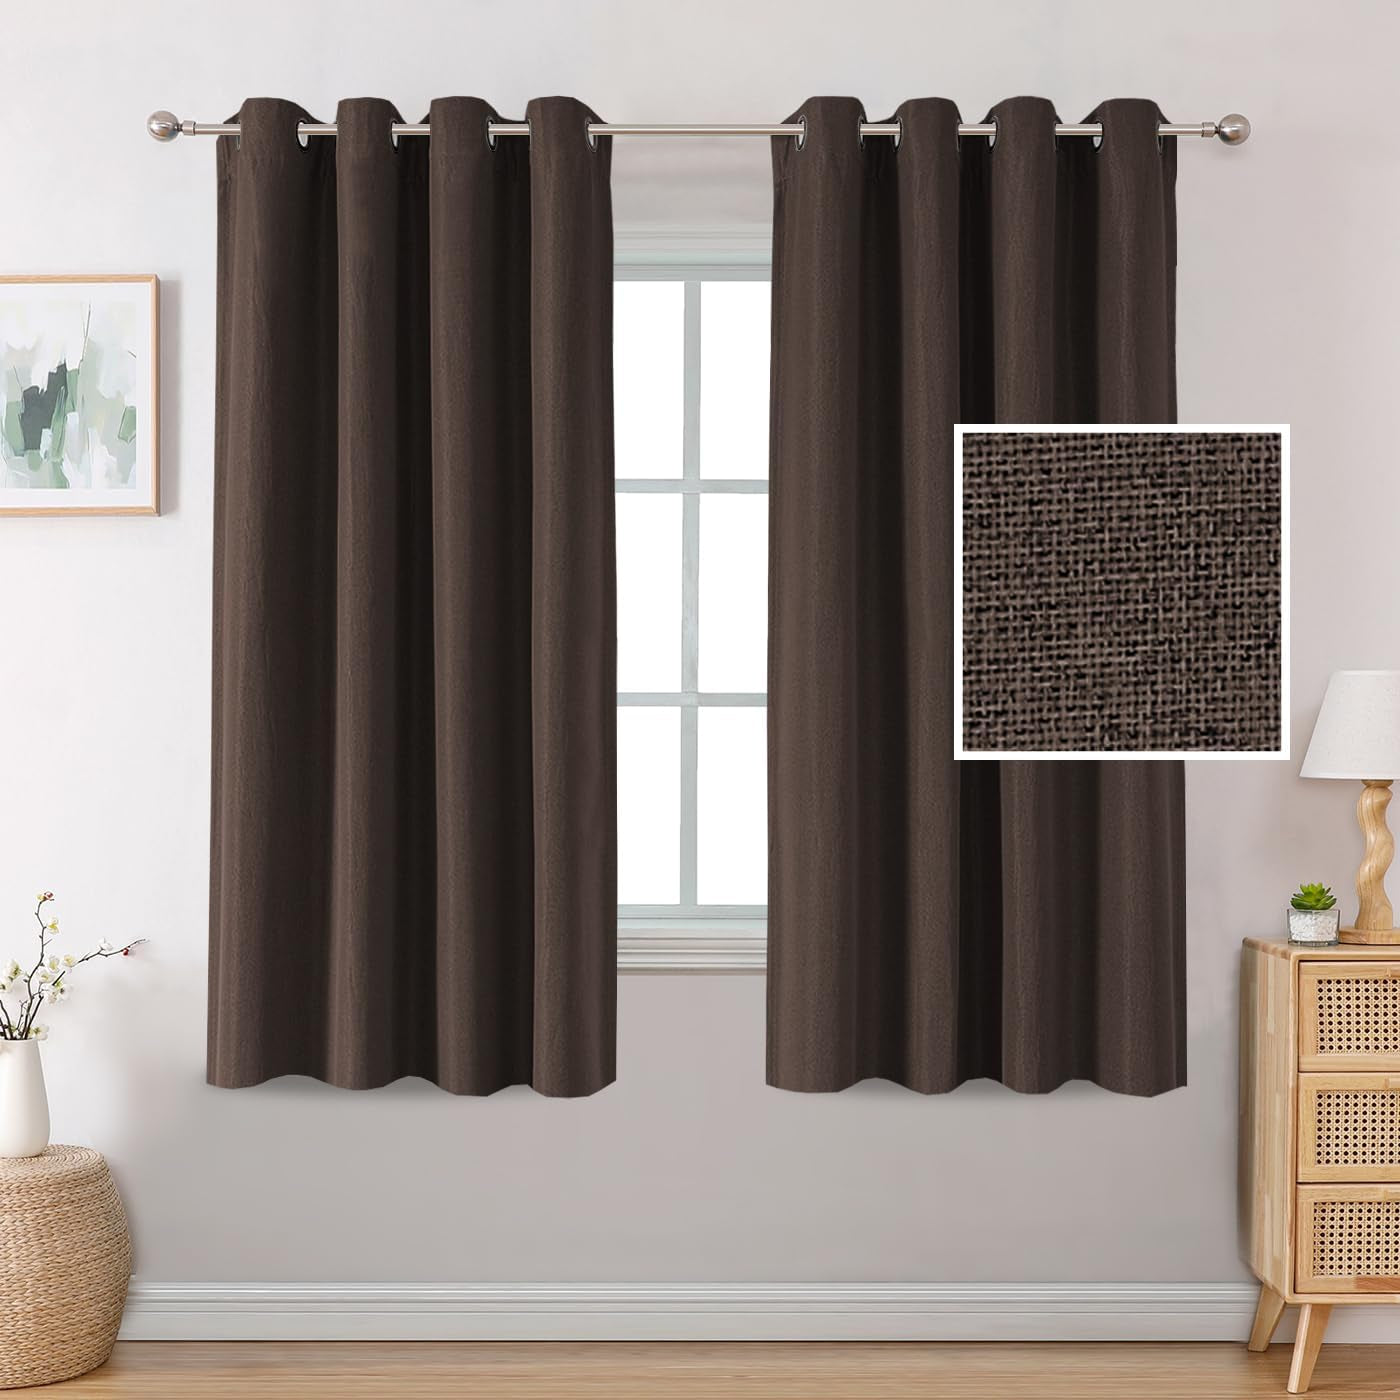 H.VERSAILTEX Linen Blackout Curtains 84 Inches Long Thermal Insulated Room Darkening Linen Curtains for Bedroom Textured Burlap Grommet Window Curtains for Living Room, Bluestone and Taupe, 2 Panels  H.VERSAILTEX Dark Brown 52"W X 63"L 